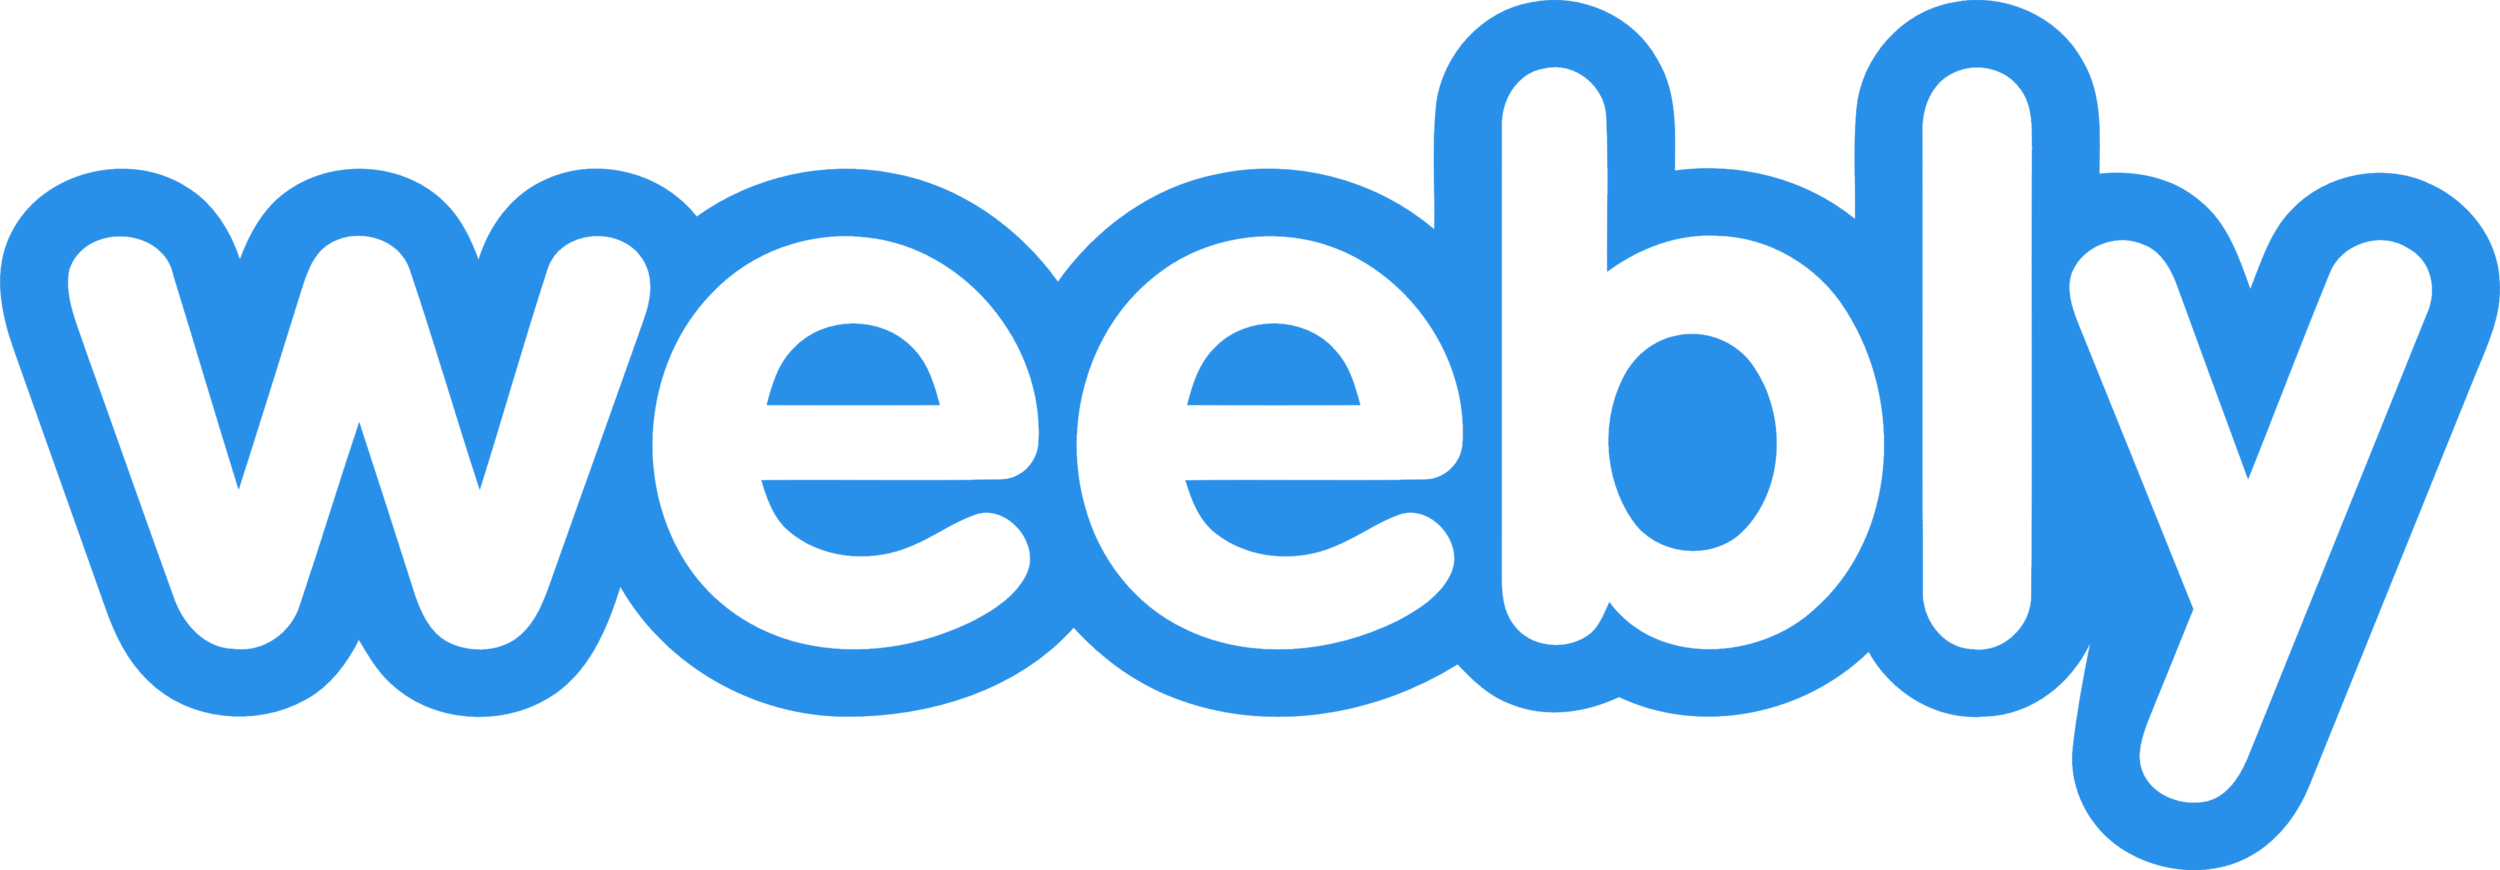 Weebly_logo.png